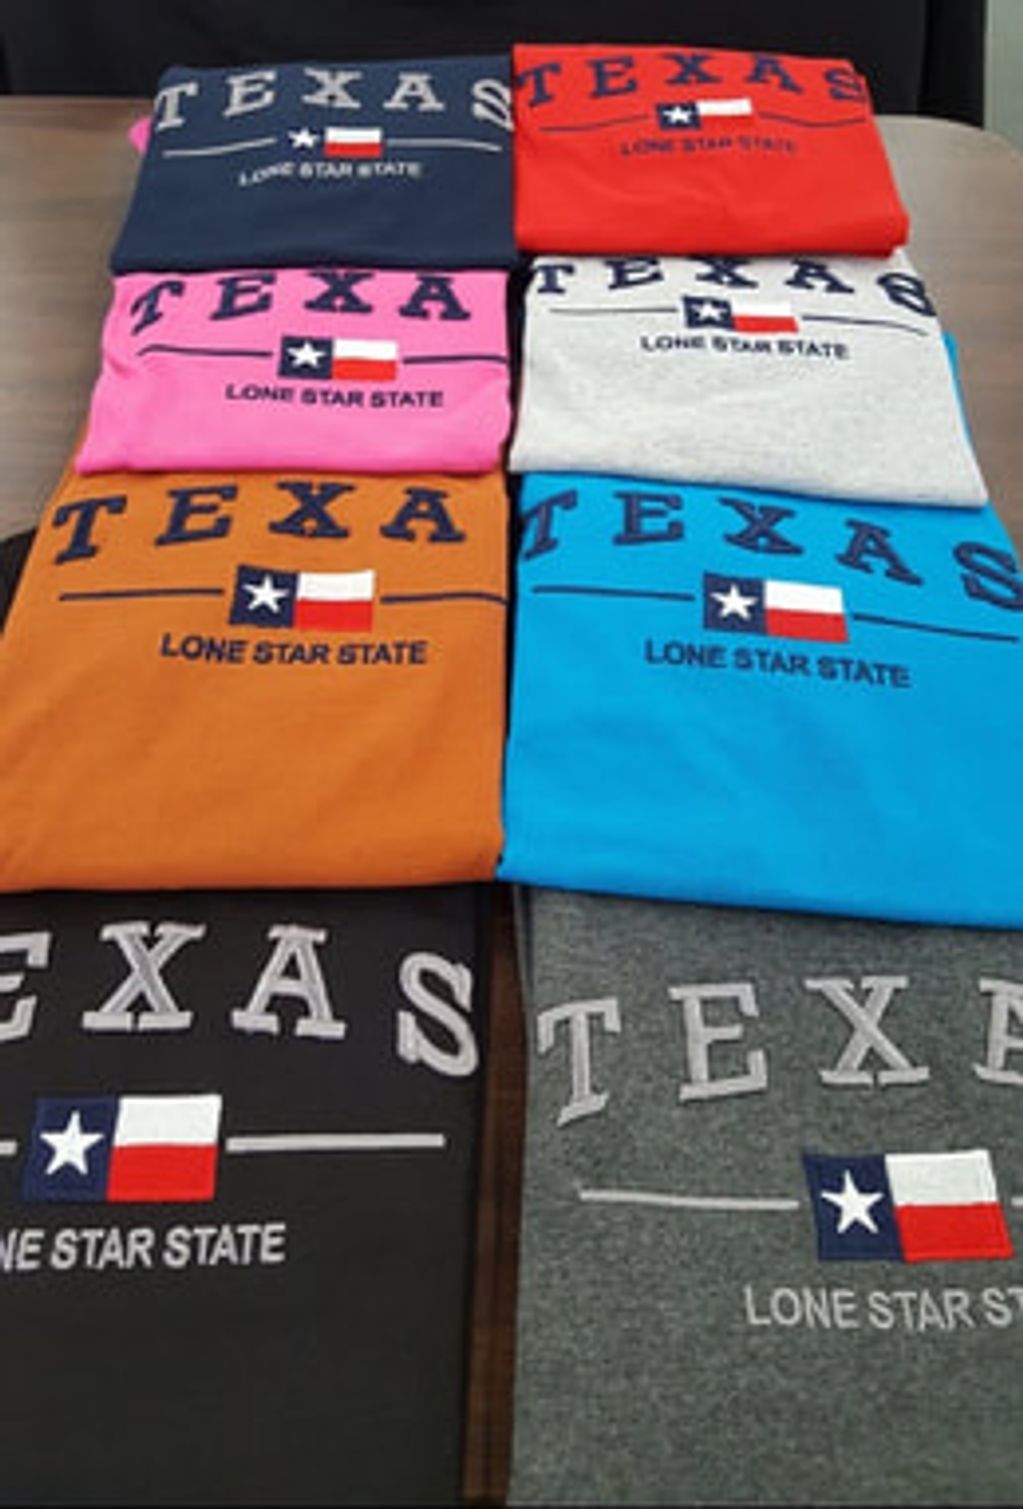 Texas Shirts - Embroidery
Available in S M LG X LG. XXLG.
Available in 8 colors shown.